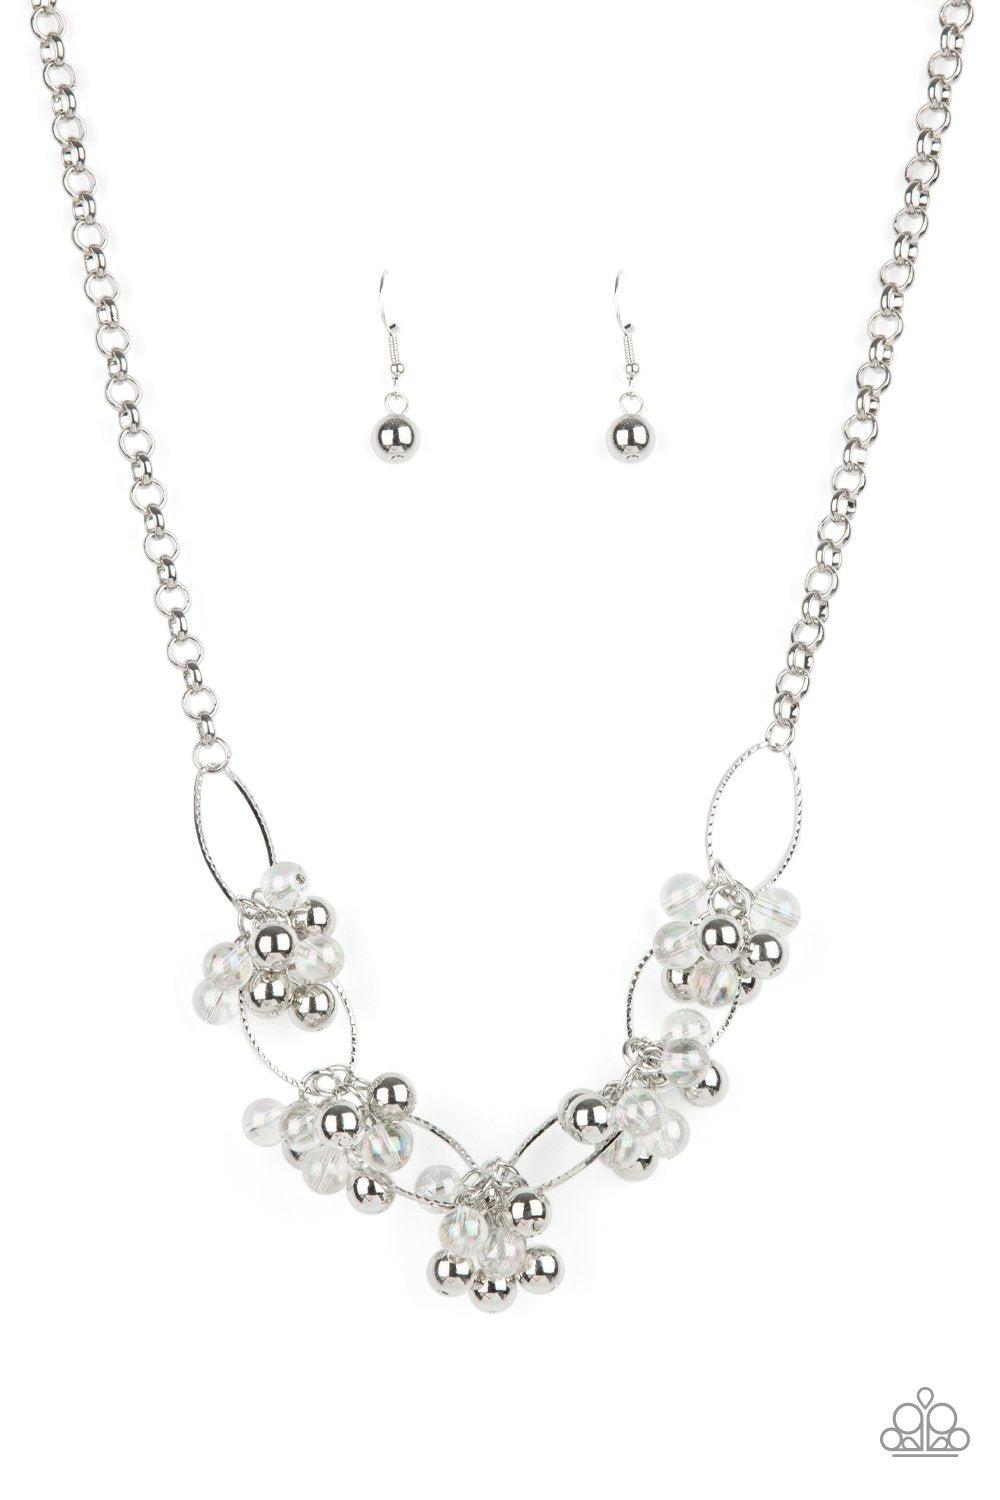 Effervescent Ensemble White Necklace - Paparazzi Accessories LOTP Exclusive July 2021- lightbox - CarasShop.com - $5 Jewelry by Cara Jewels